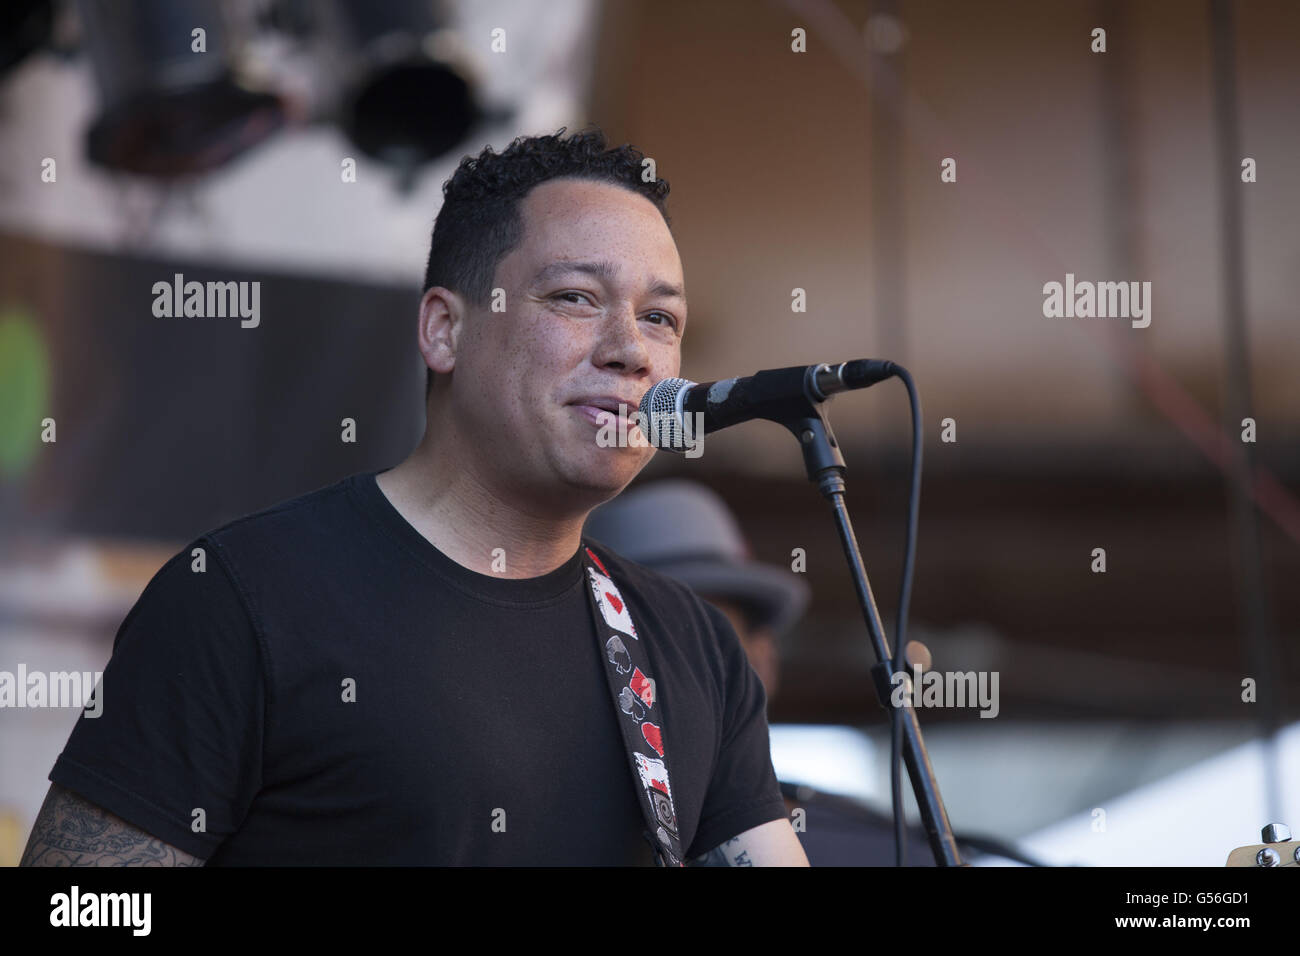 Chicago, Illinois, USA. 19th June, 2016. Maceo Haymes of The O'My's performing live at Wicker Parks, Green Music Festival in Chicago Illinois © Rick Majewski/ZUMA Wire/Alamy Live News Stock Photo